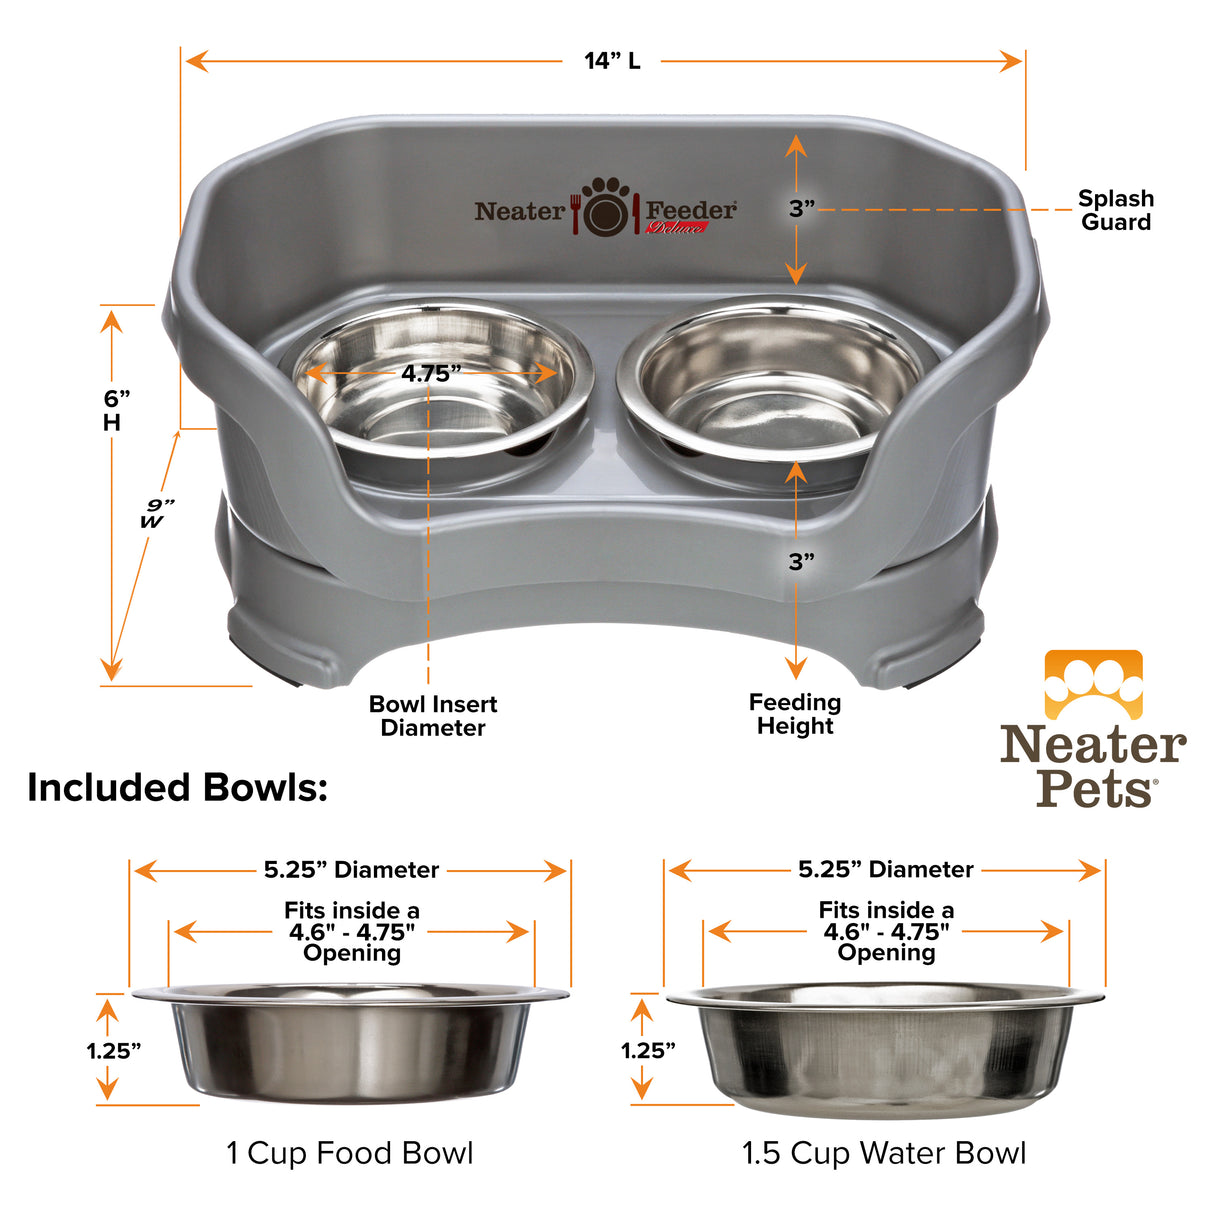 Deluxe Gunmetal Grey Cat Neater Feeder and Bowl dimensions